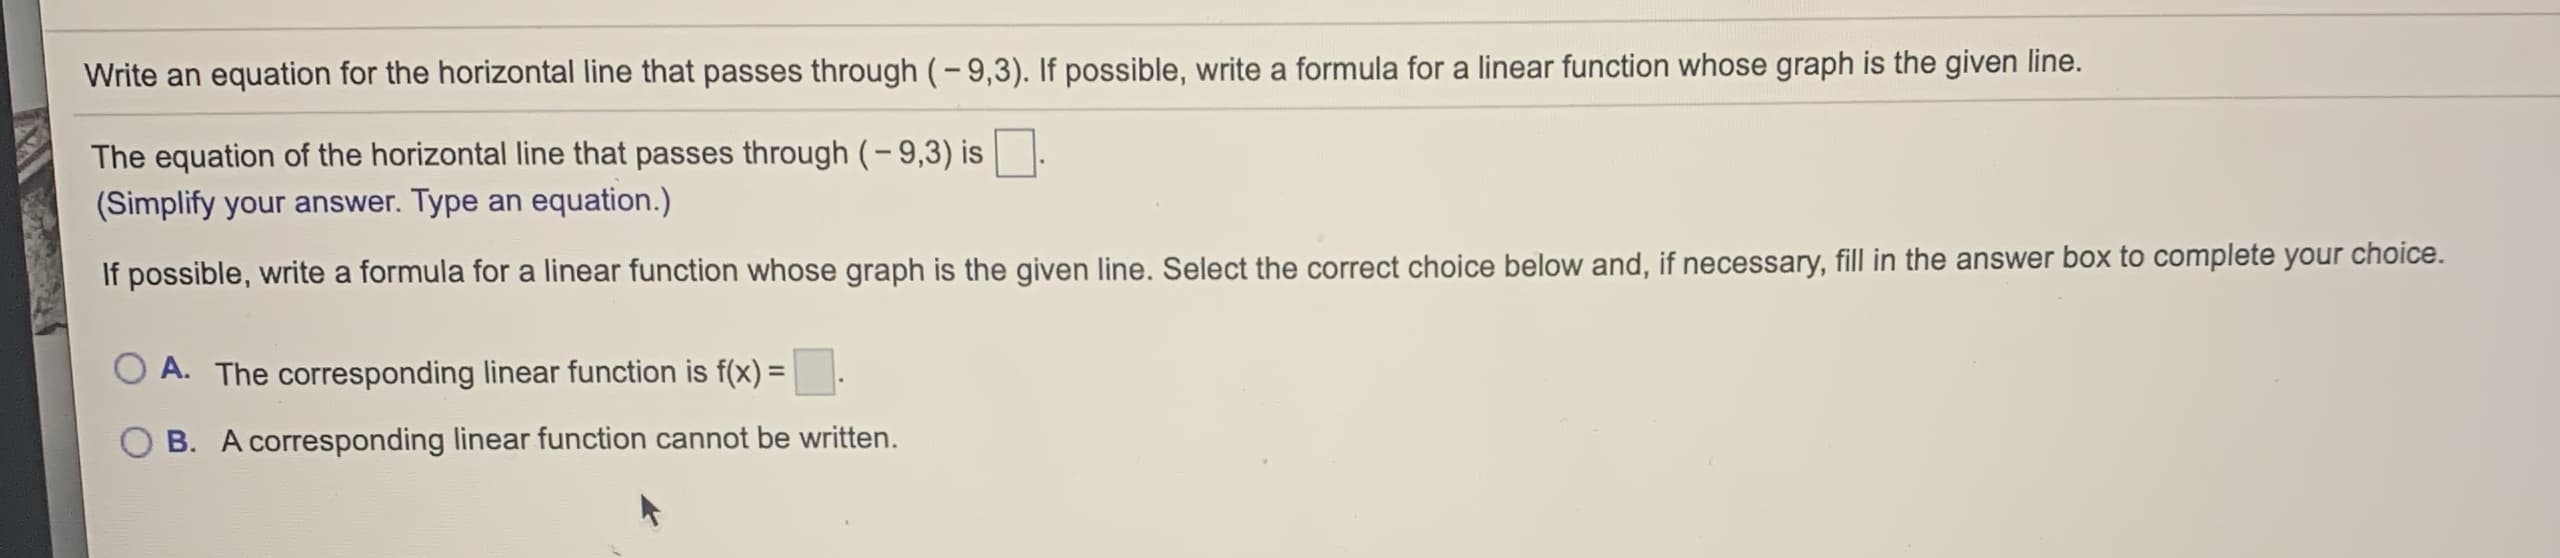 Write an equation for the horizontal line that passes through (-9,3). If possible, write a formula for a linear function whose graph is the given line.
The equation of the horizontal line that passes through (- 9,3) is
(Simplify your answer. Type an equation.)
If possible, write a formula for a linear function whose graph is the given line. Select the correct choice below and, if necessary, fill in the answer box to complete your choice.
A. The corresponding linear function is f(x) =
B. A corresponding linear function cannot be written.
